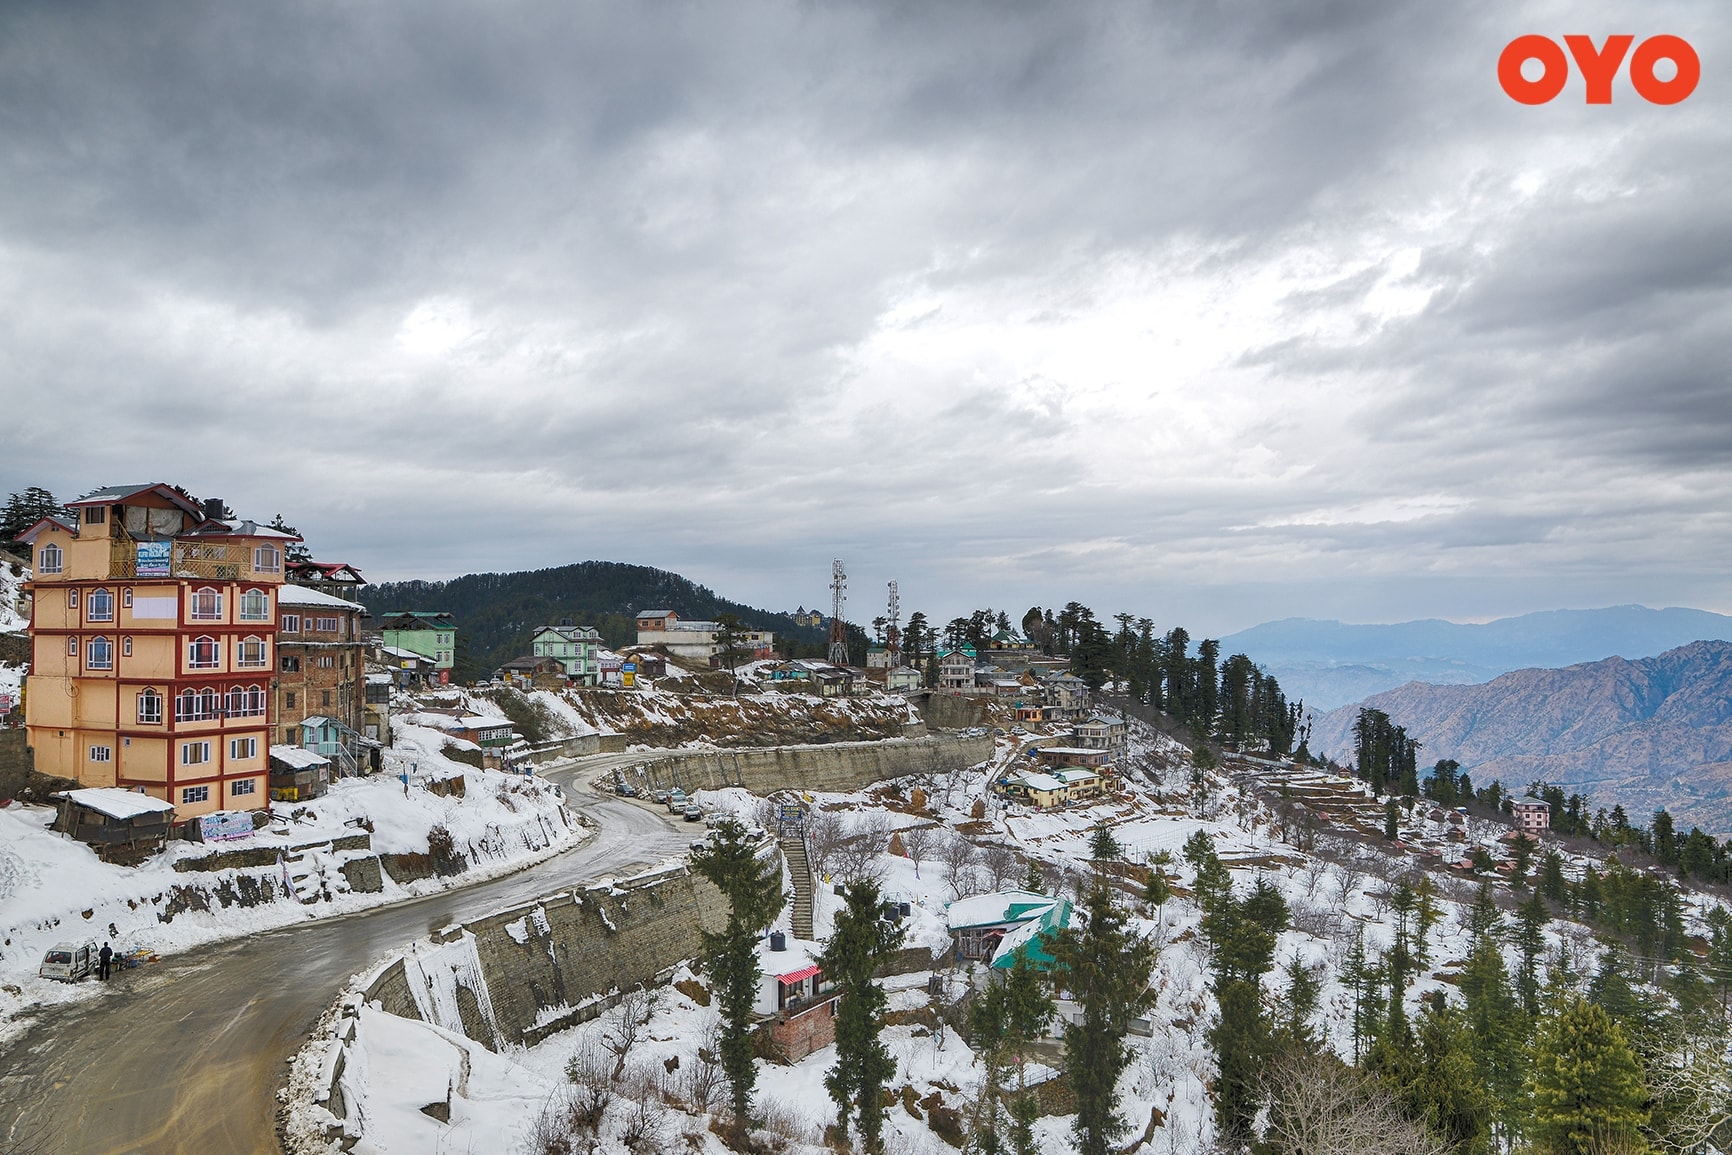 Shimla - one of the best places to see snowfall in winter